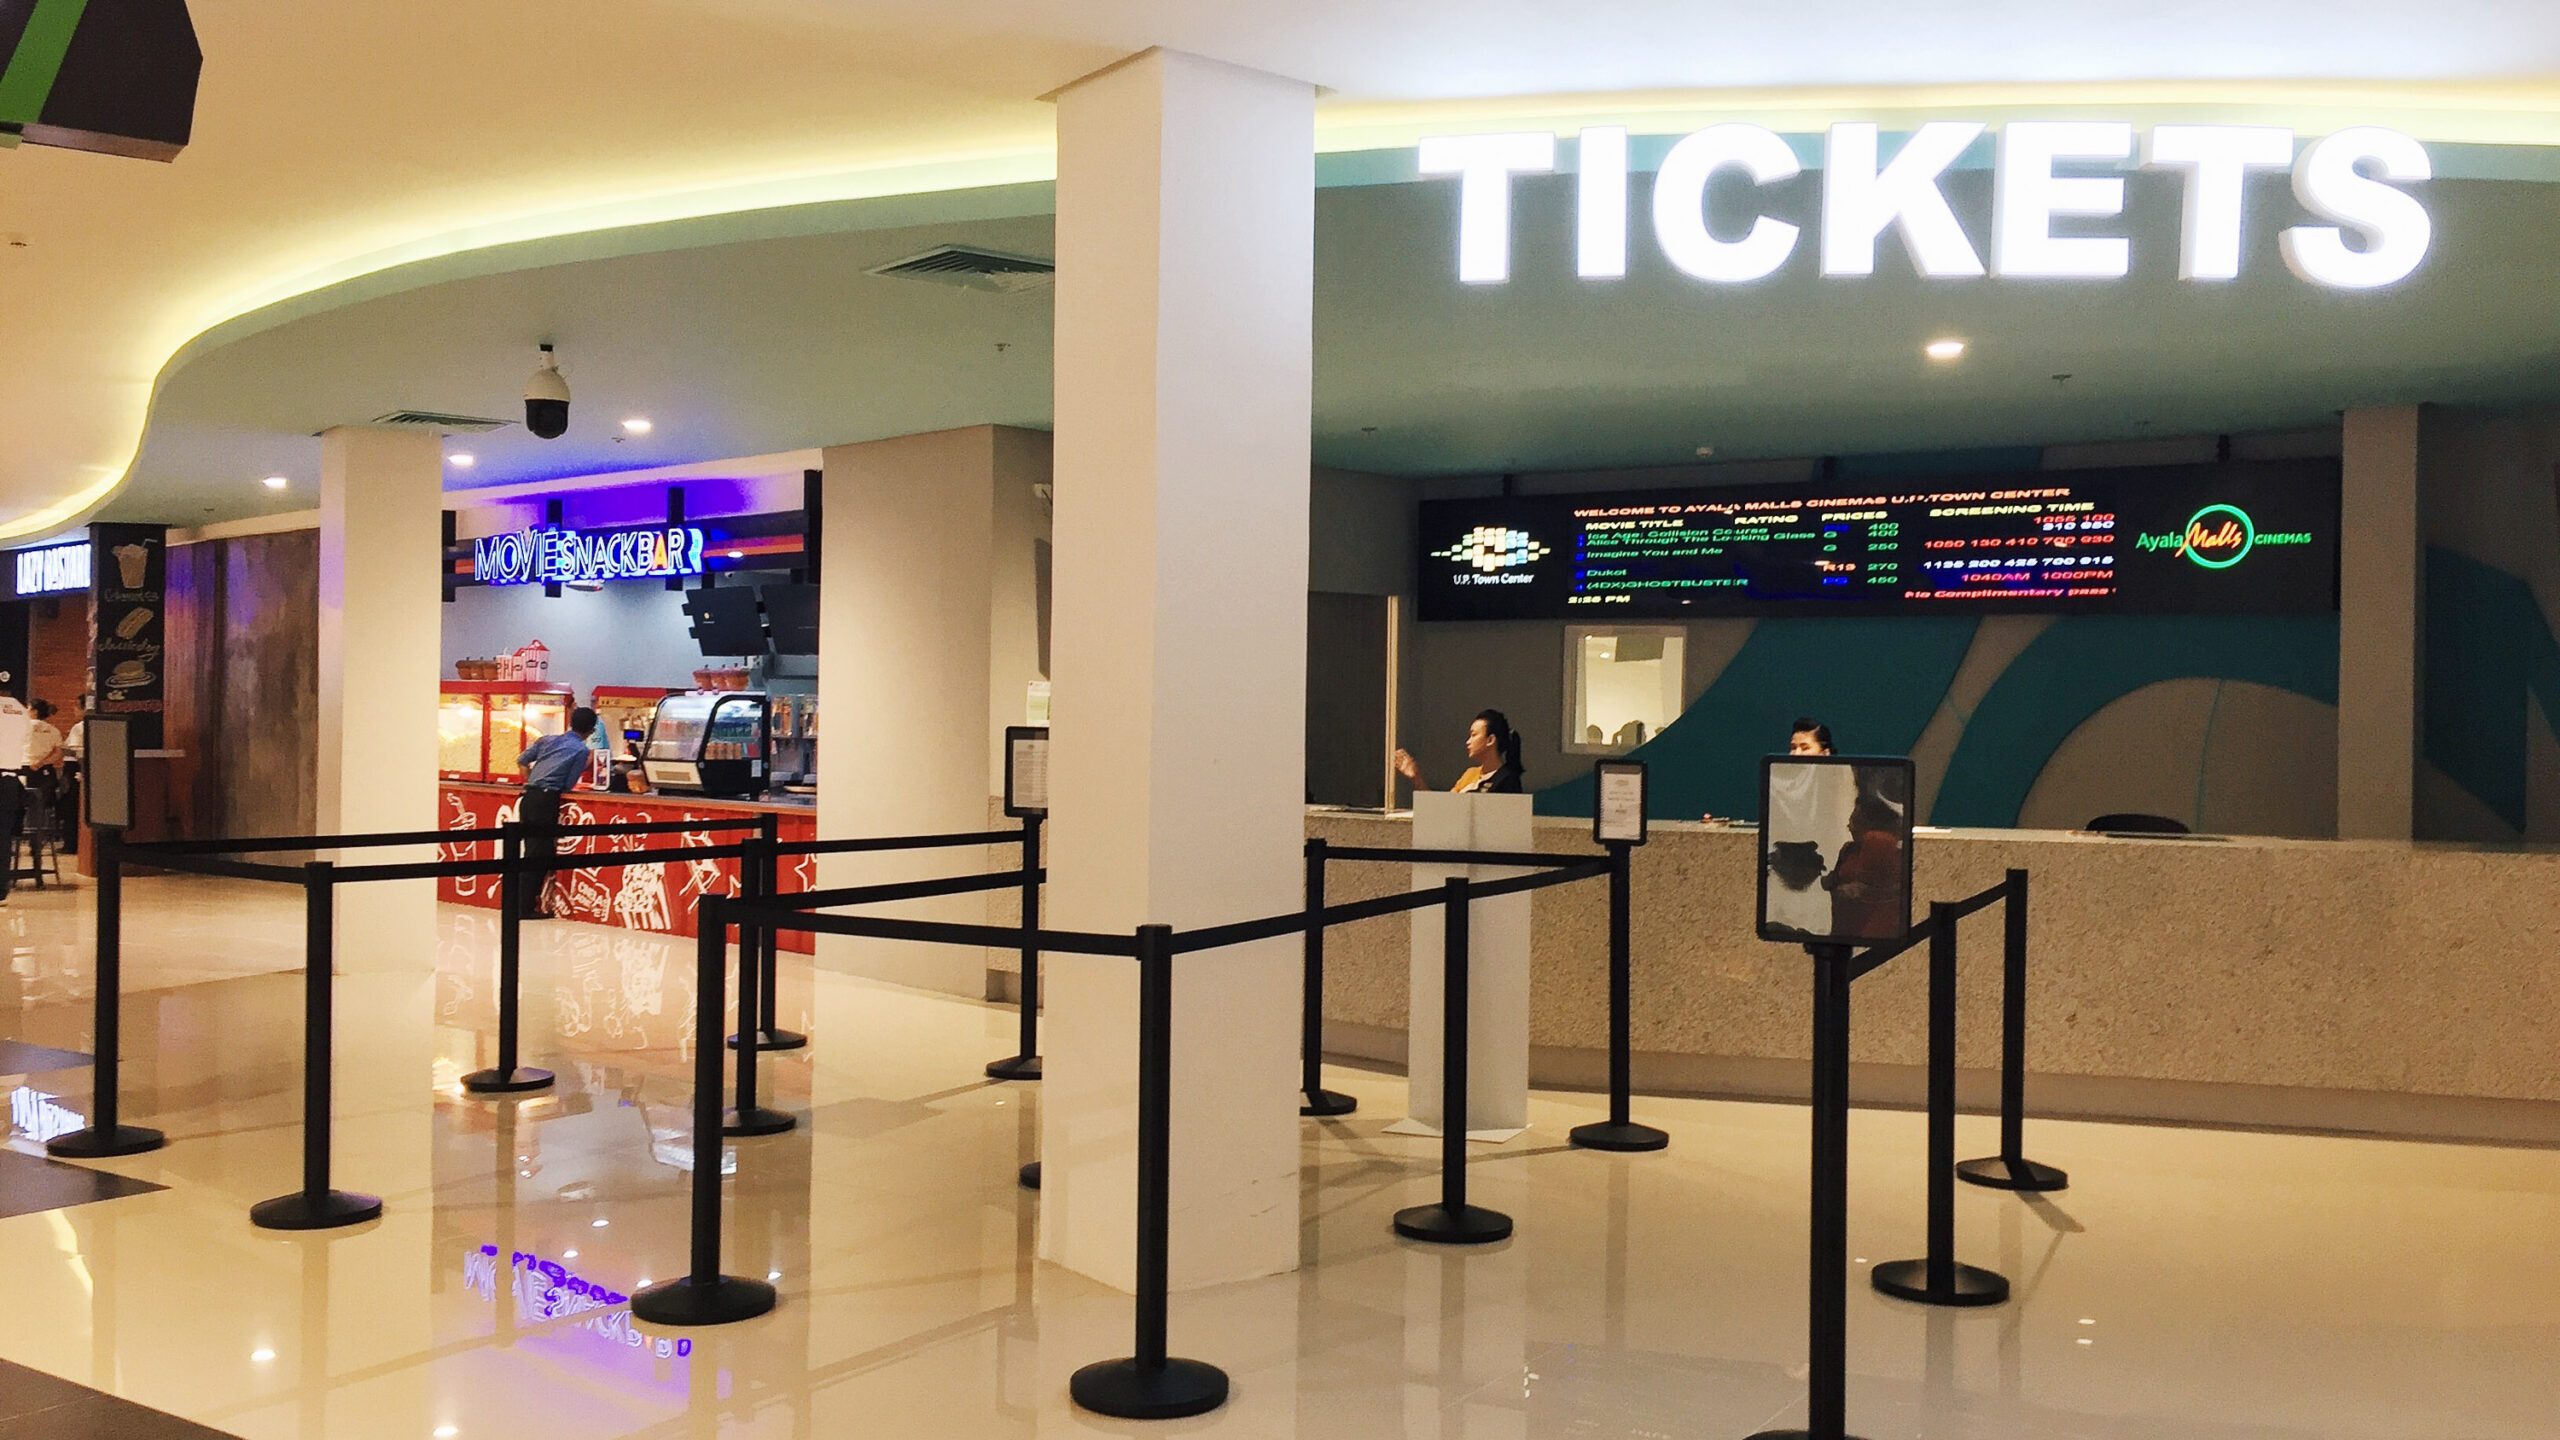 IN PHOTOS: Inside the new UP Town Center 4DX cinema